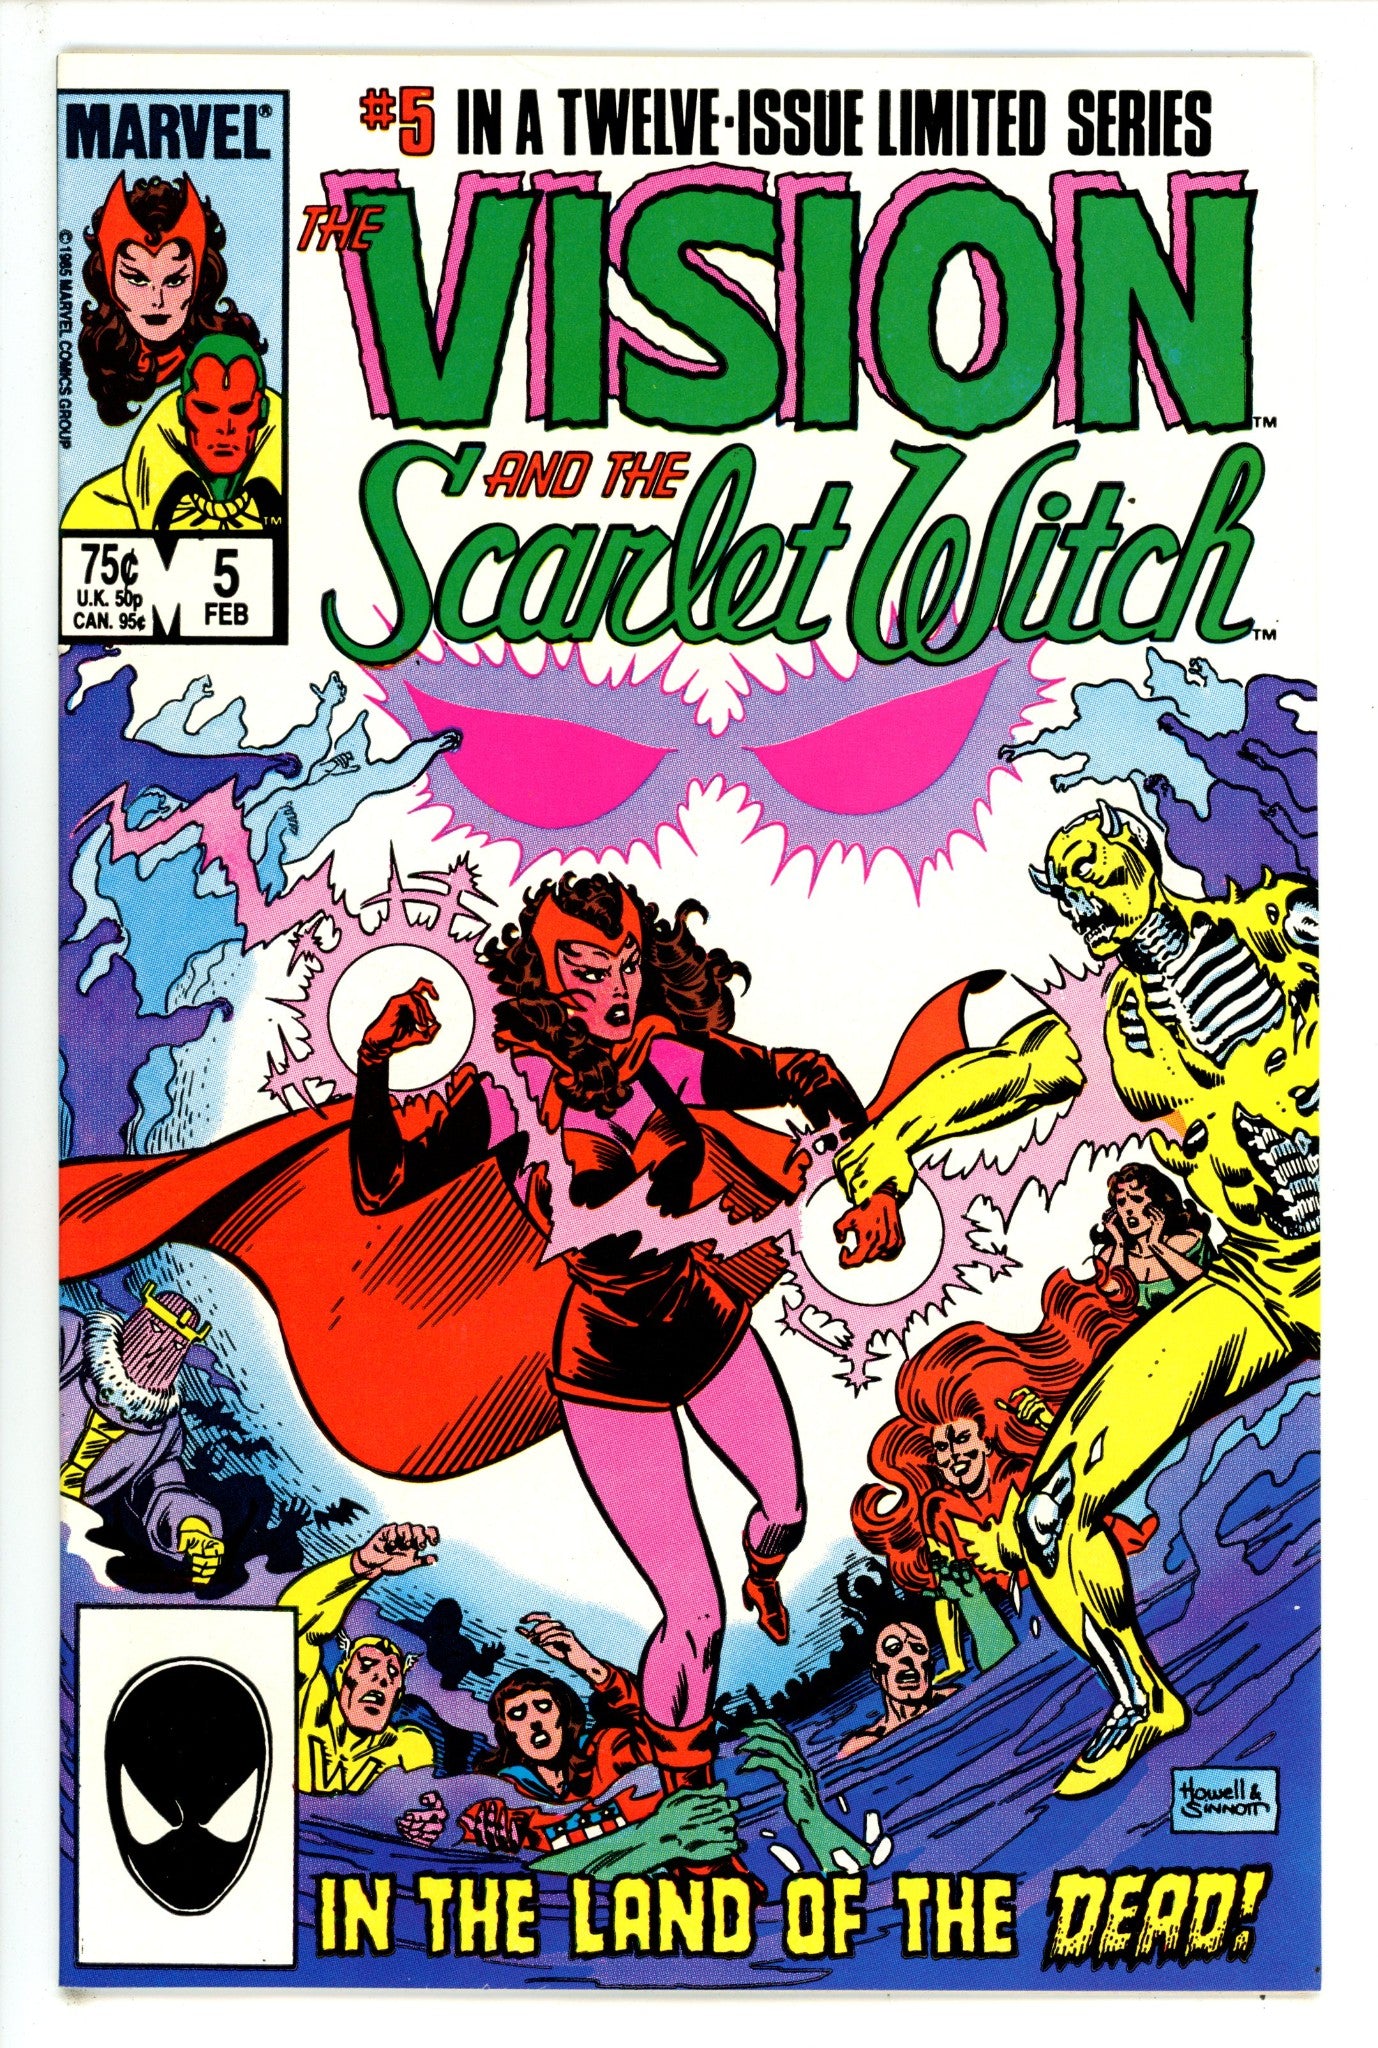 The Vision and the Scarlet Witch Vol 2 5 VF/NM (9.0) (1986) 